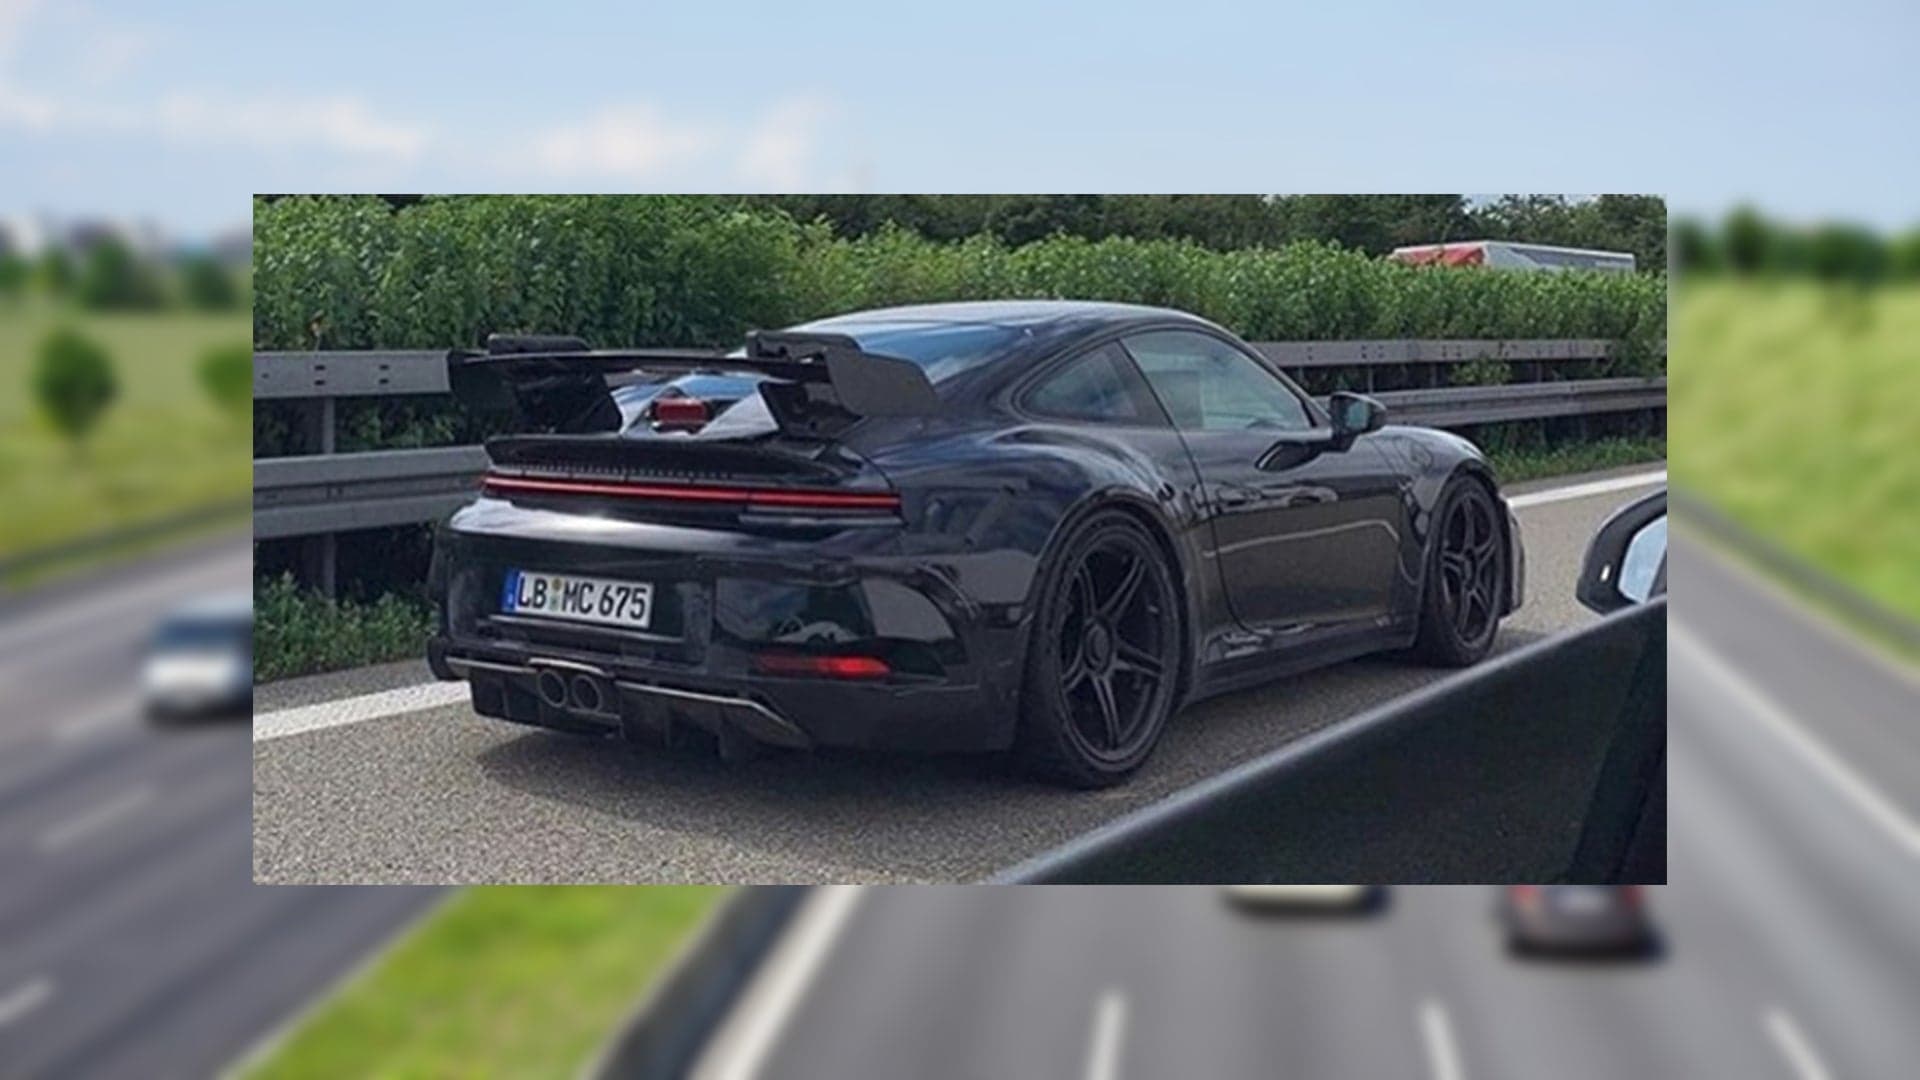 992-Generation Porsche 911 GT3 Test Mule Spotted on Autobahn With Giant Rear Wing